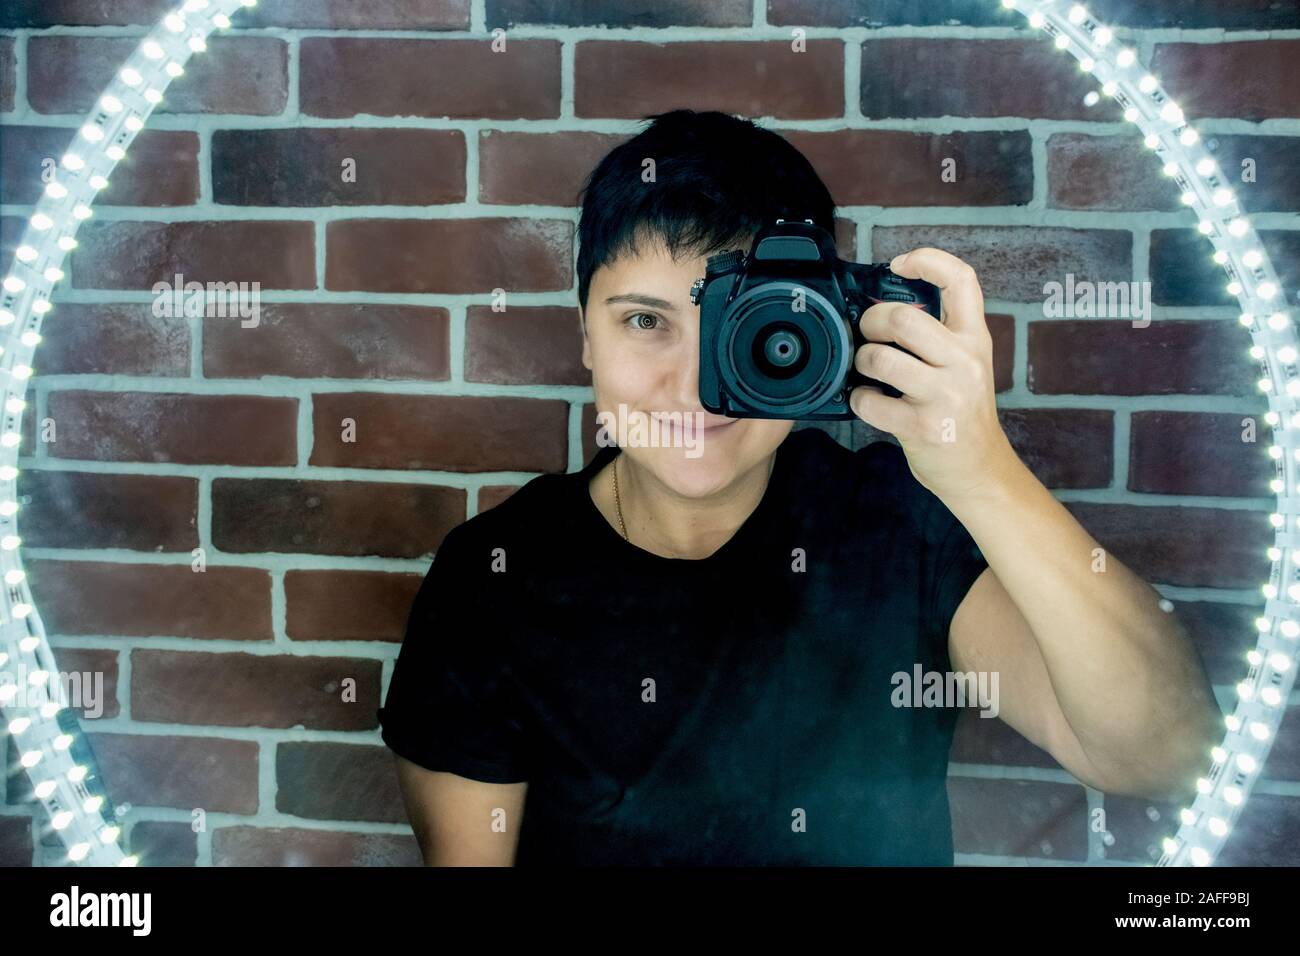 club photographer takes selfie in mirror reflection led lights Stock Photo